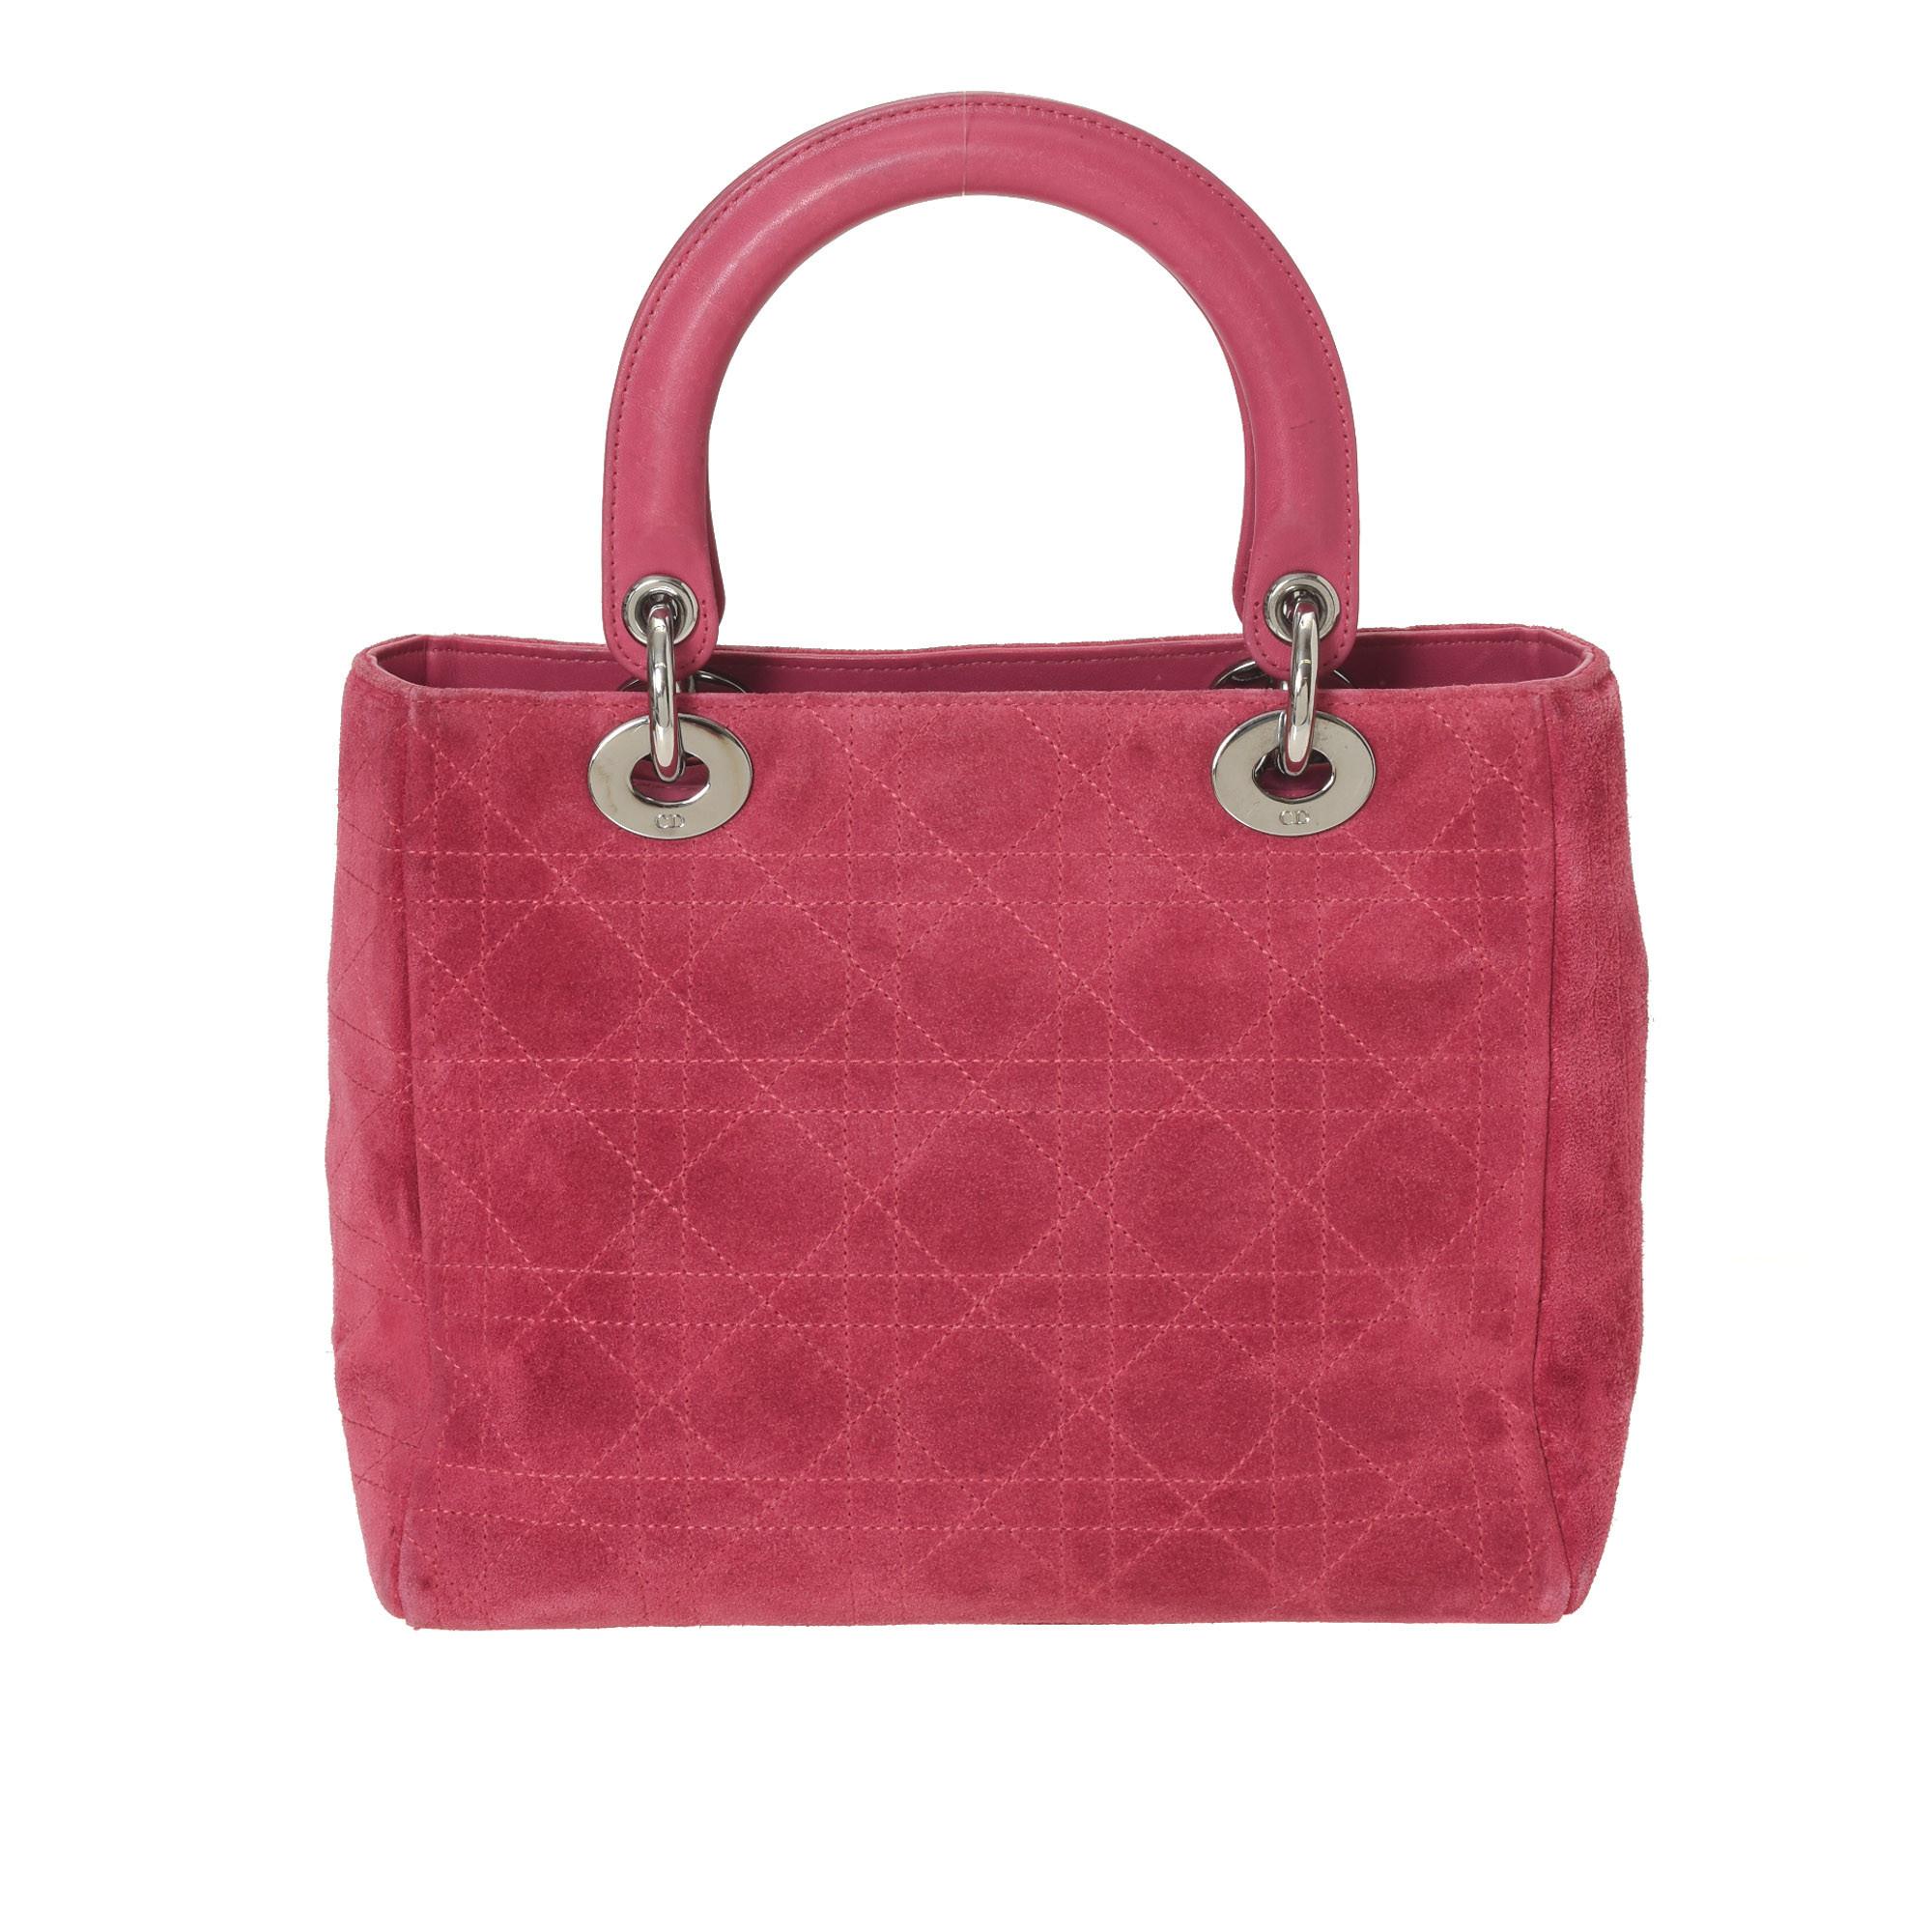 This pink Lady Dior medium handbags has been crafted from leather and suede and it carries the signature Cannage quilt. It is equipped with a black Oblique nylon interior and two top handles. The gorgeous piece is complete with the classic Dior